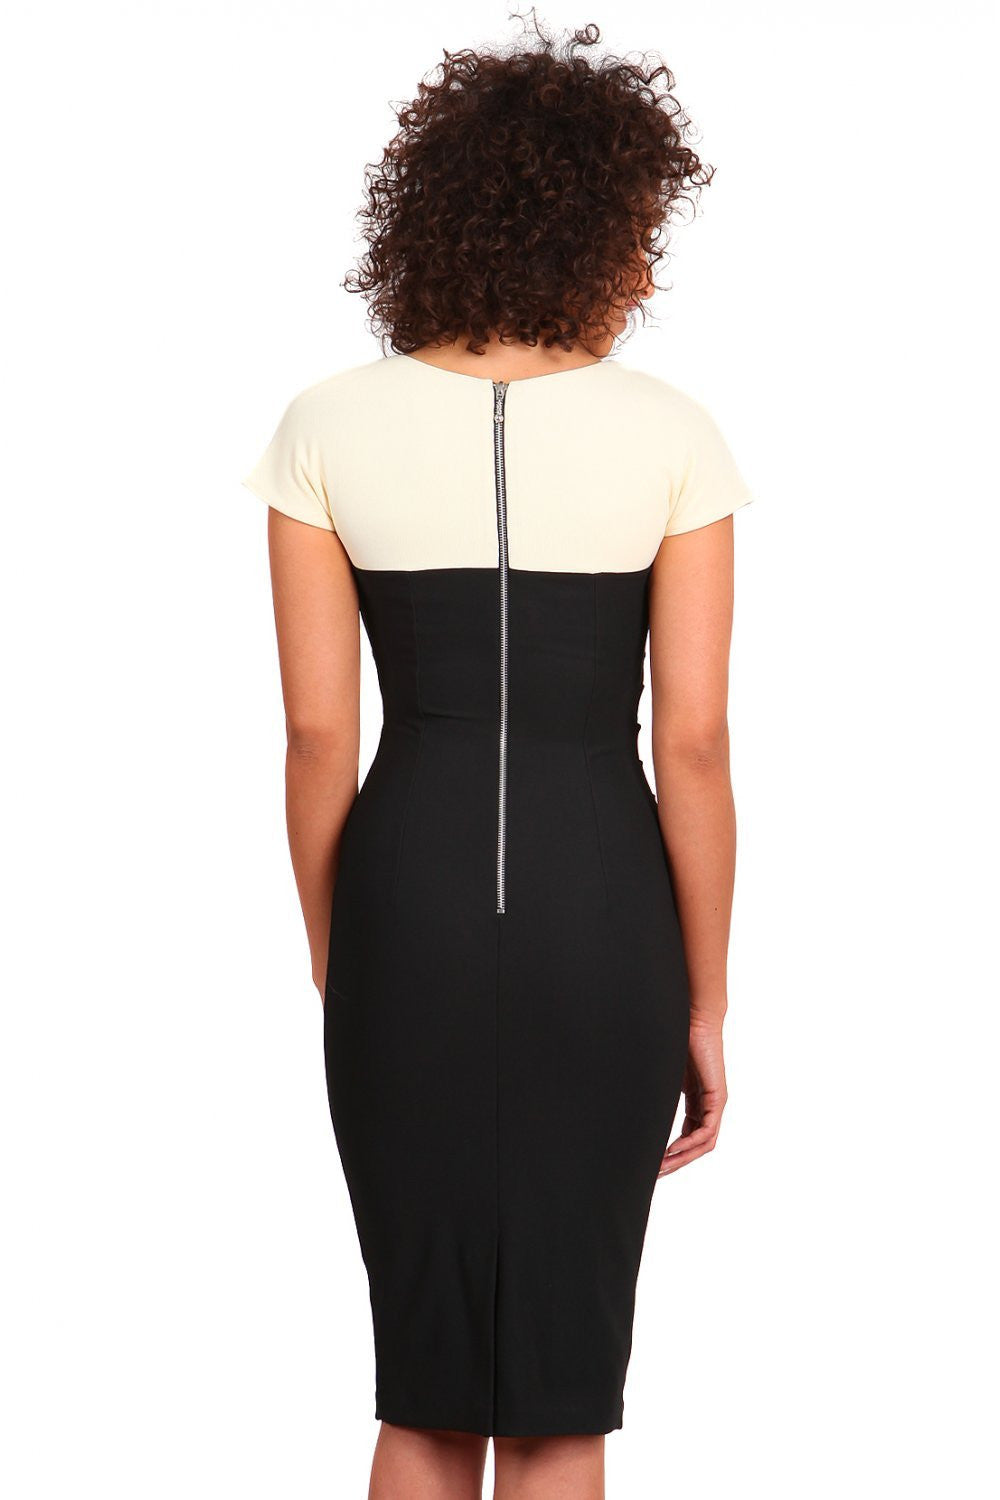 Model wearing the Diva Bryony Contrast dress with contrasting top and exposed zip at the back in black and vanilla cream back image